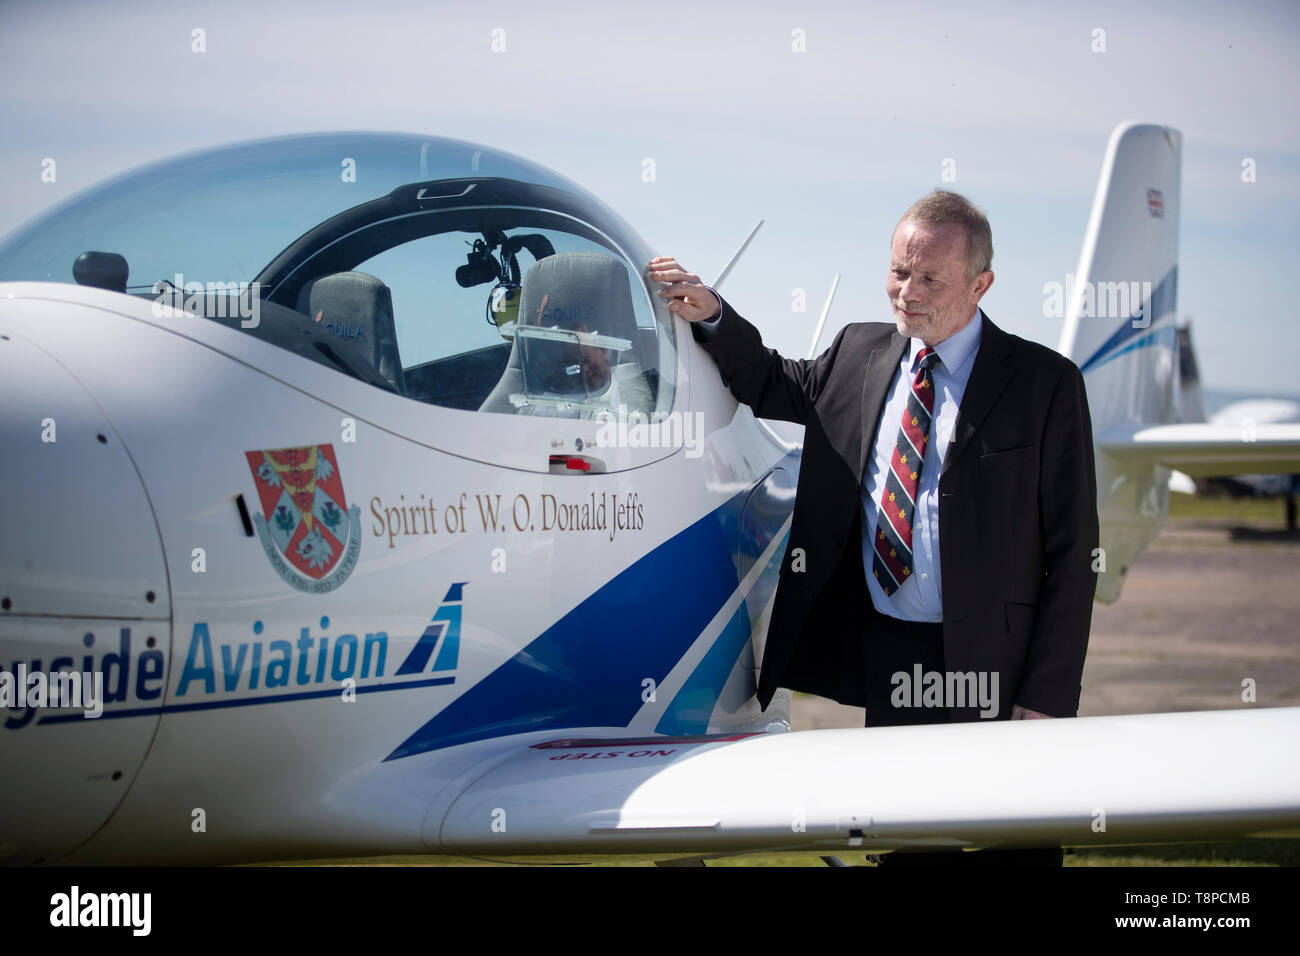 Philip Jeffs stands alongside the plane named after his late father Donald Jeffs which is one of a quartet of aircraft commemorating one of the most poignant tales of wartime Britain at Tayside Aviation, Dundee. Stock Photo